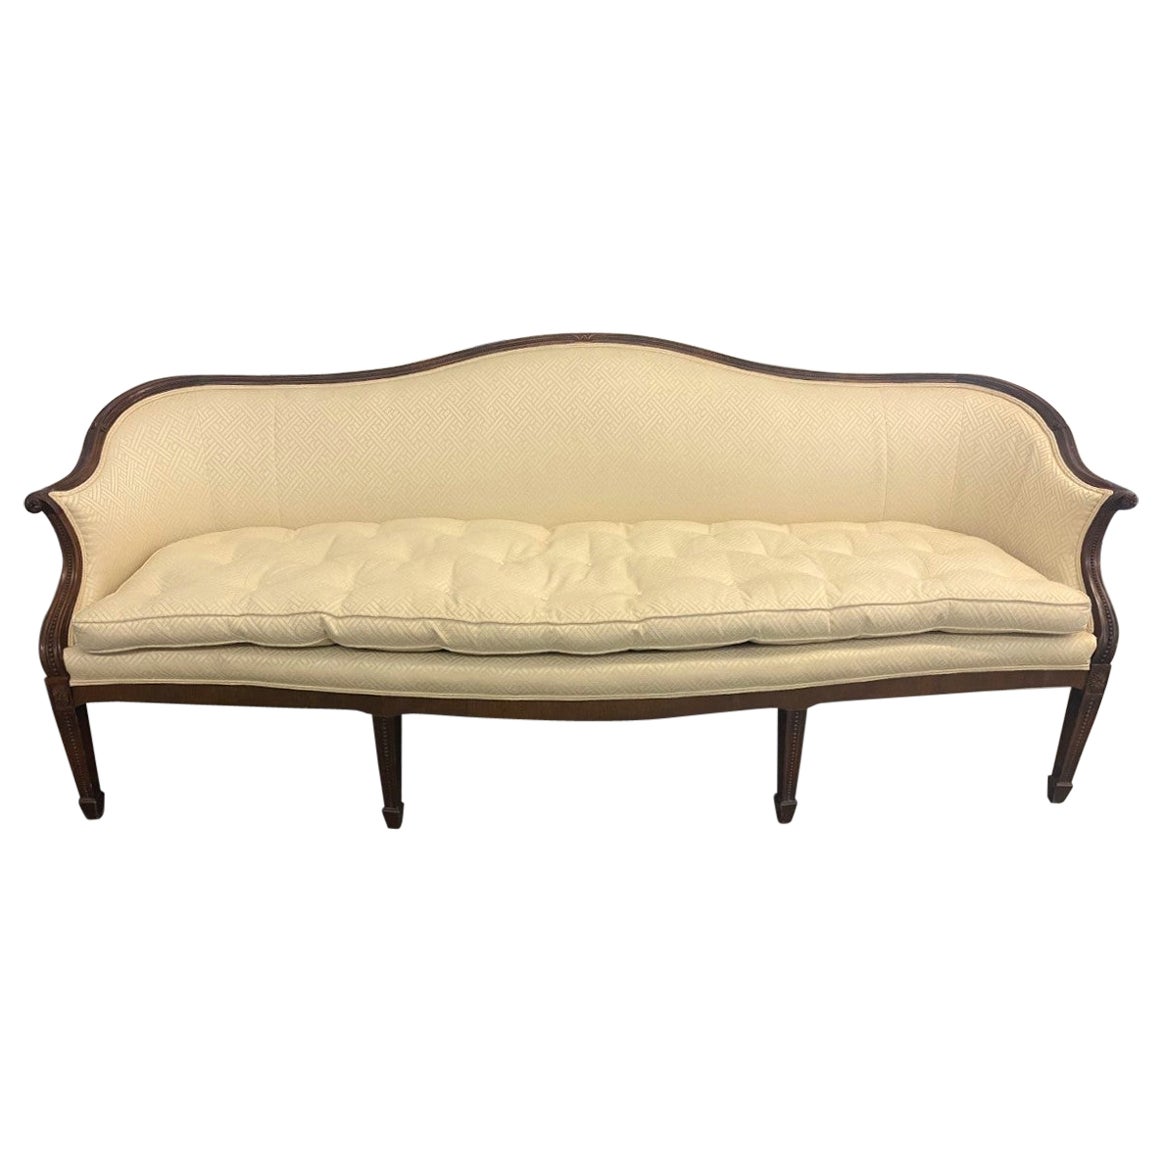 Mahogany Serpentine Shaped Hepplewhite Style Sofa with Pea and Foliate Carving For Sale